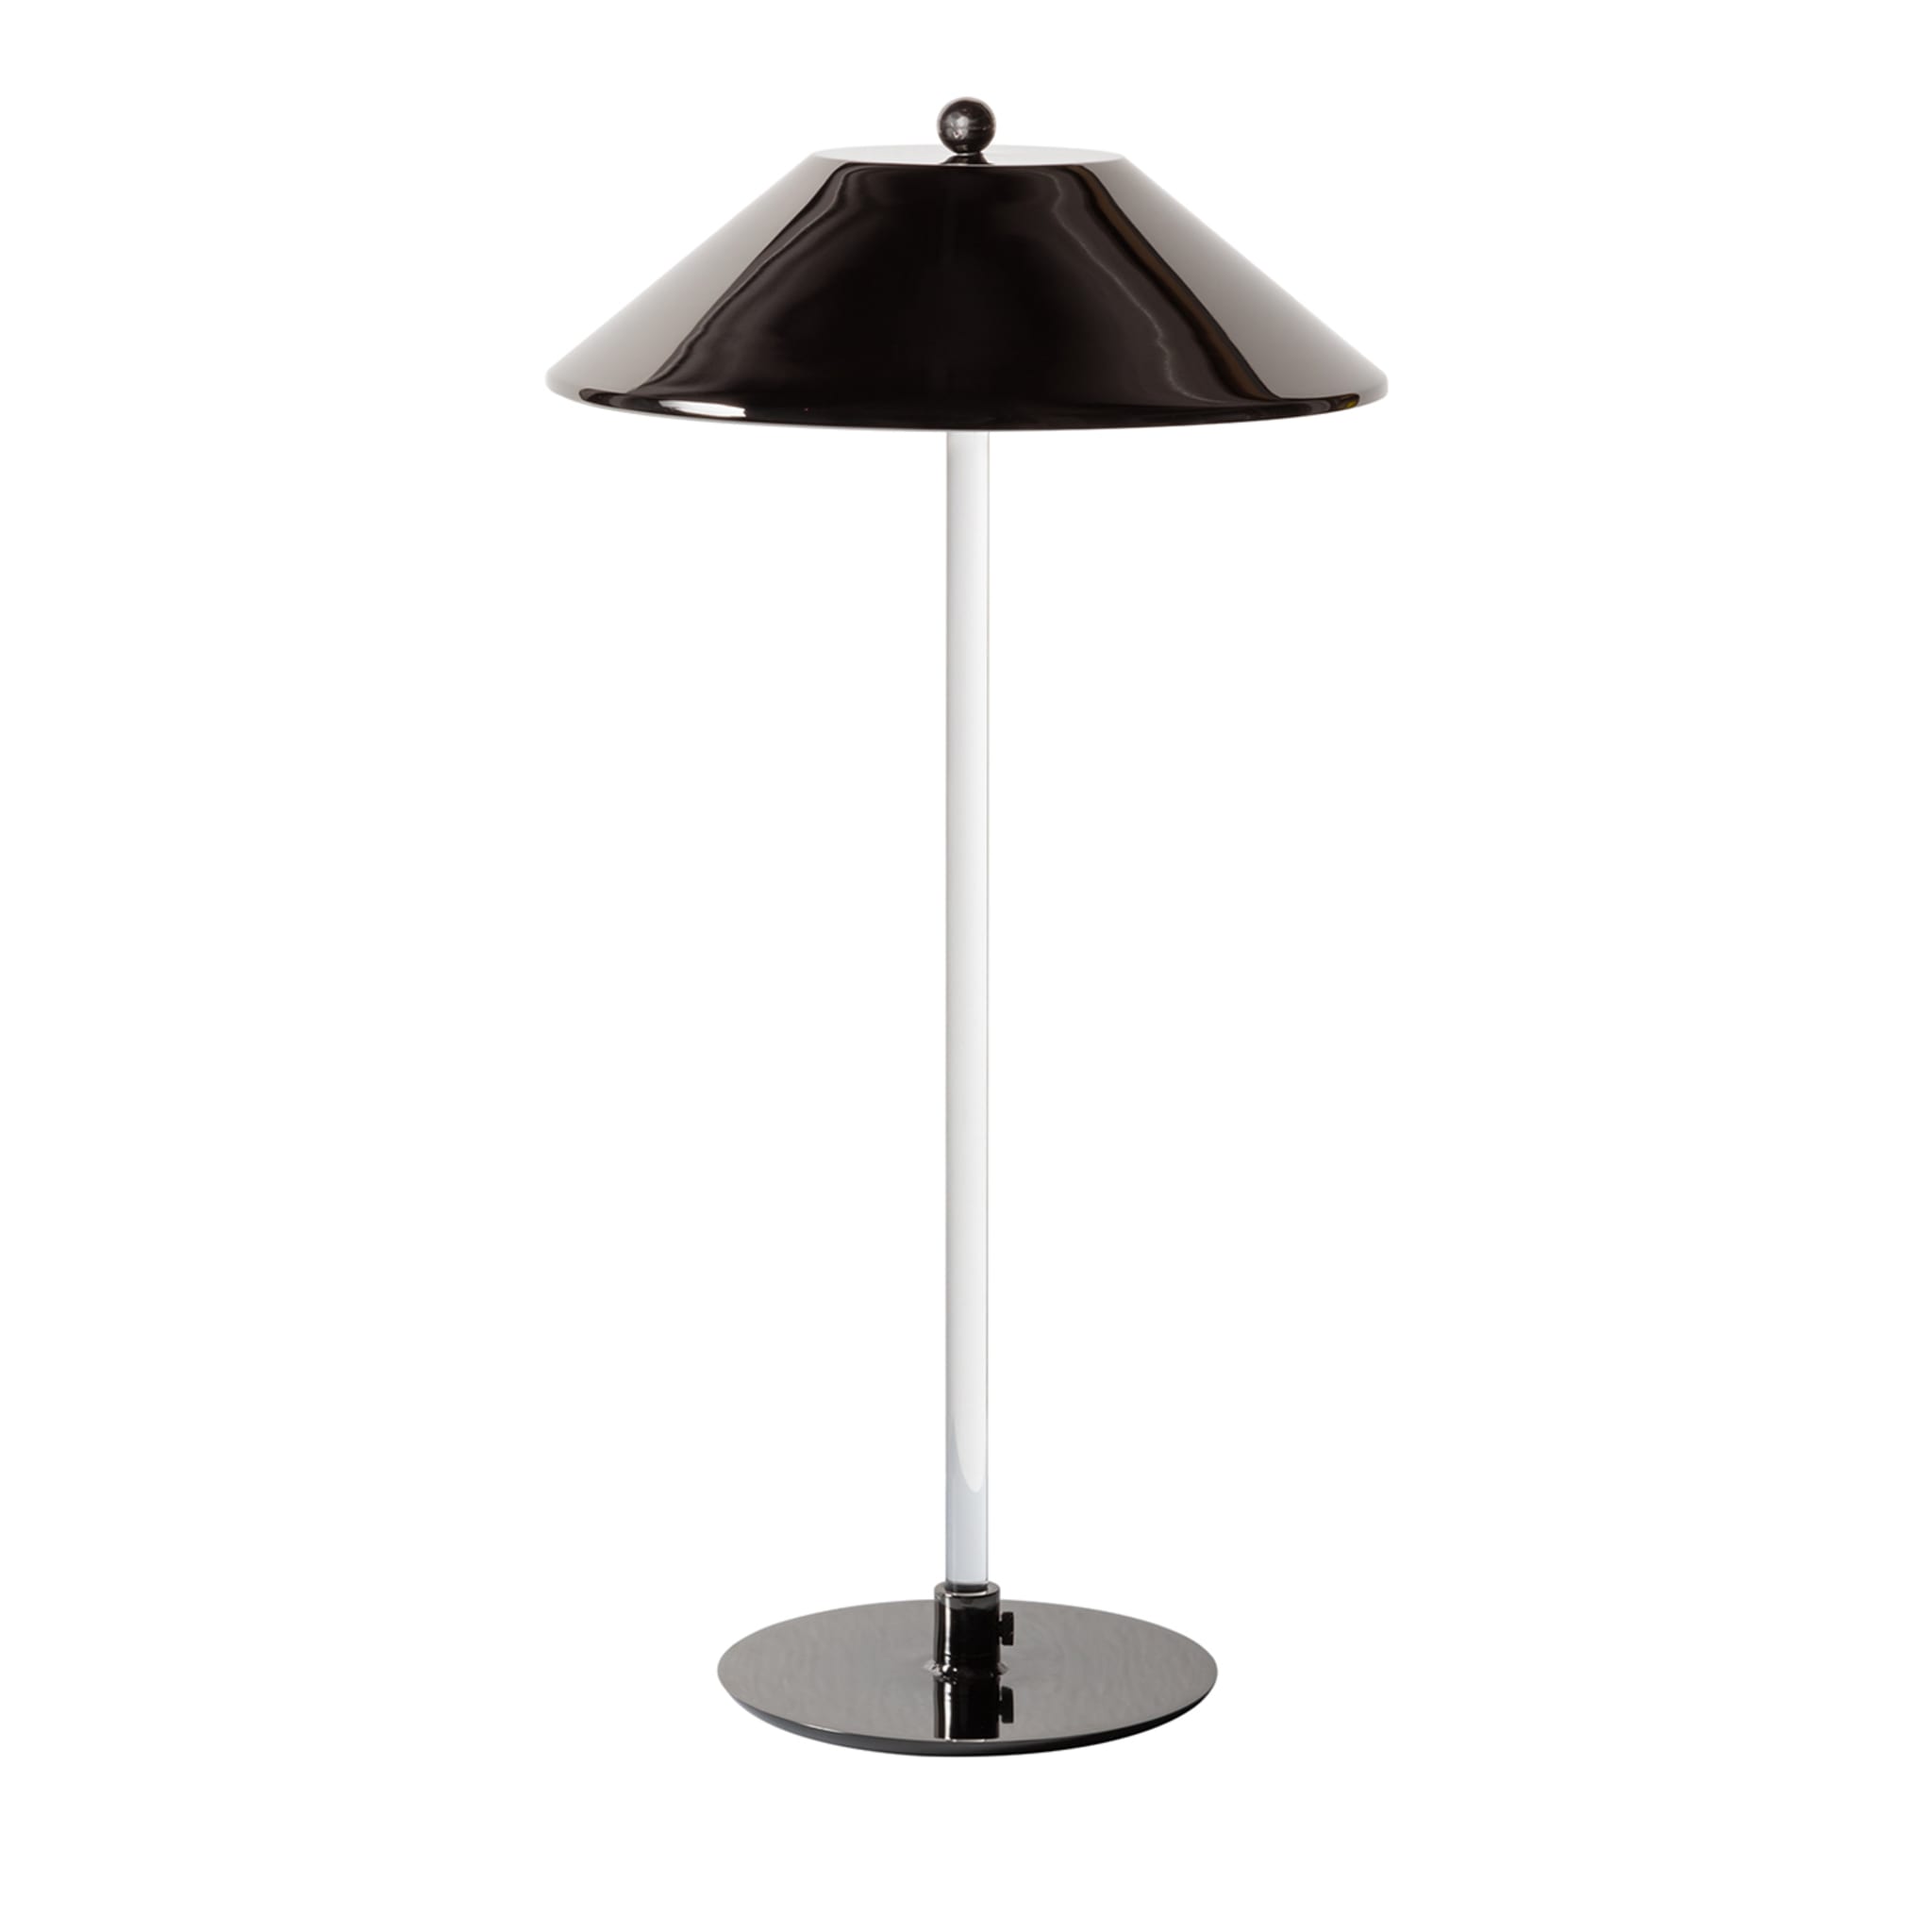 Candilee Polished Black Table Lamp by Isacco Brioschi - Main view